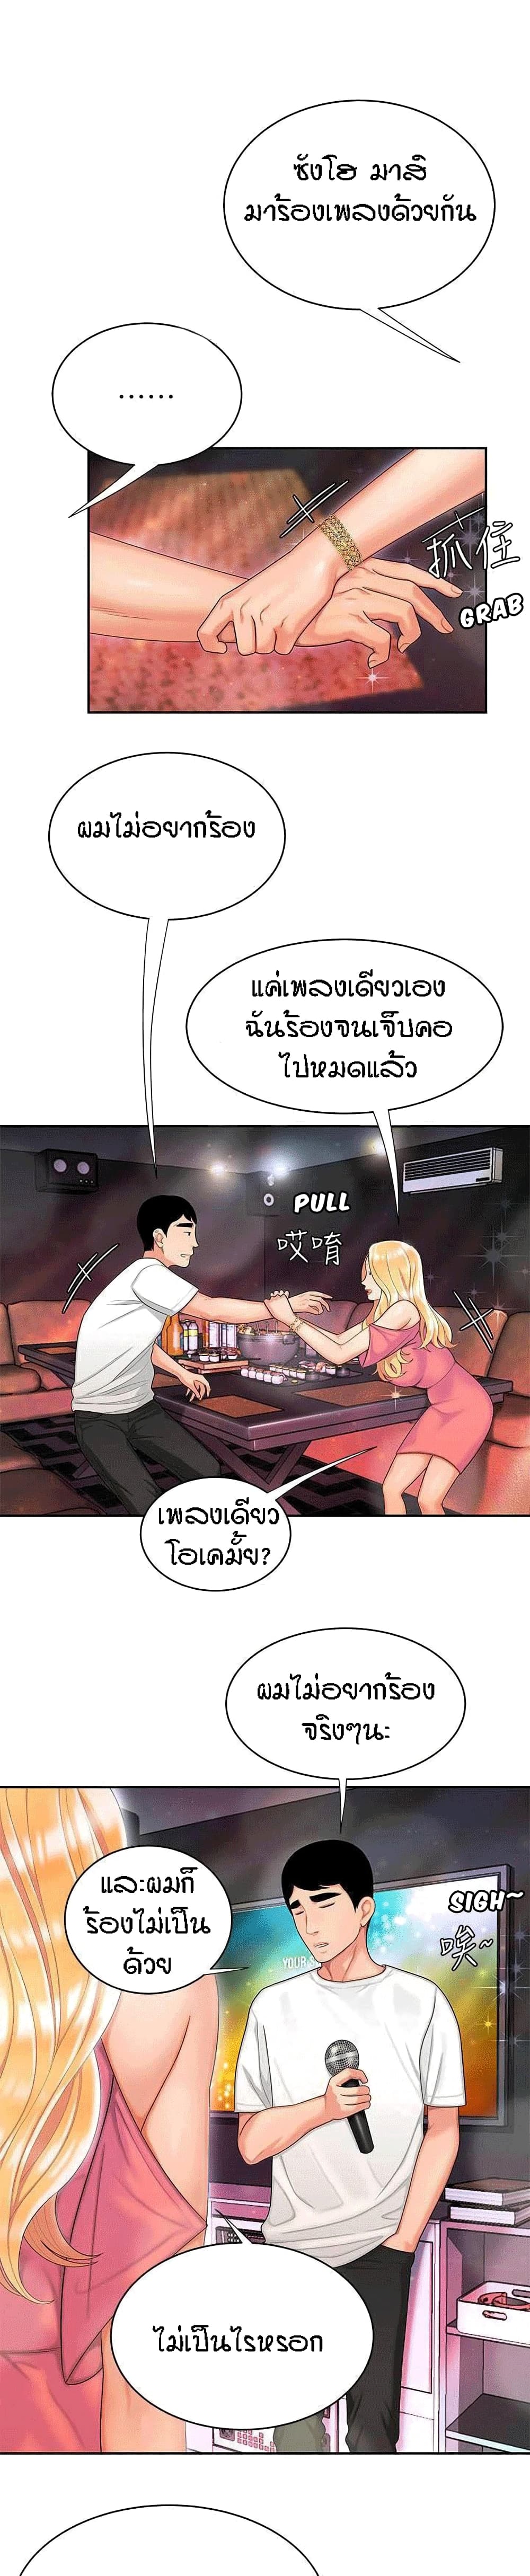 Delivery Man 12 (20)